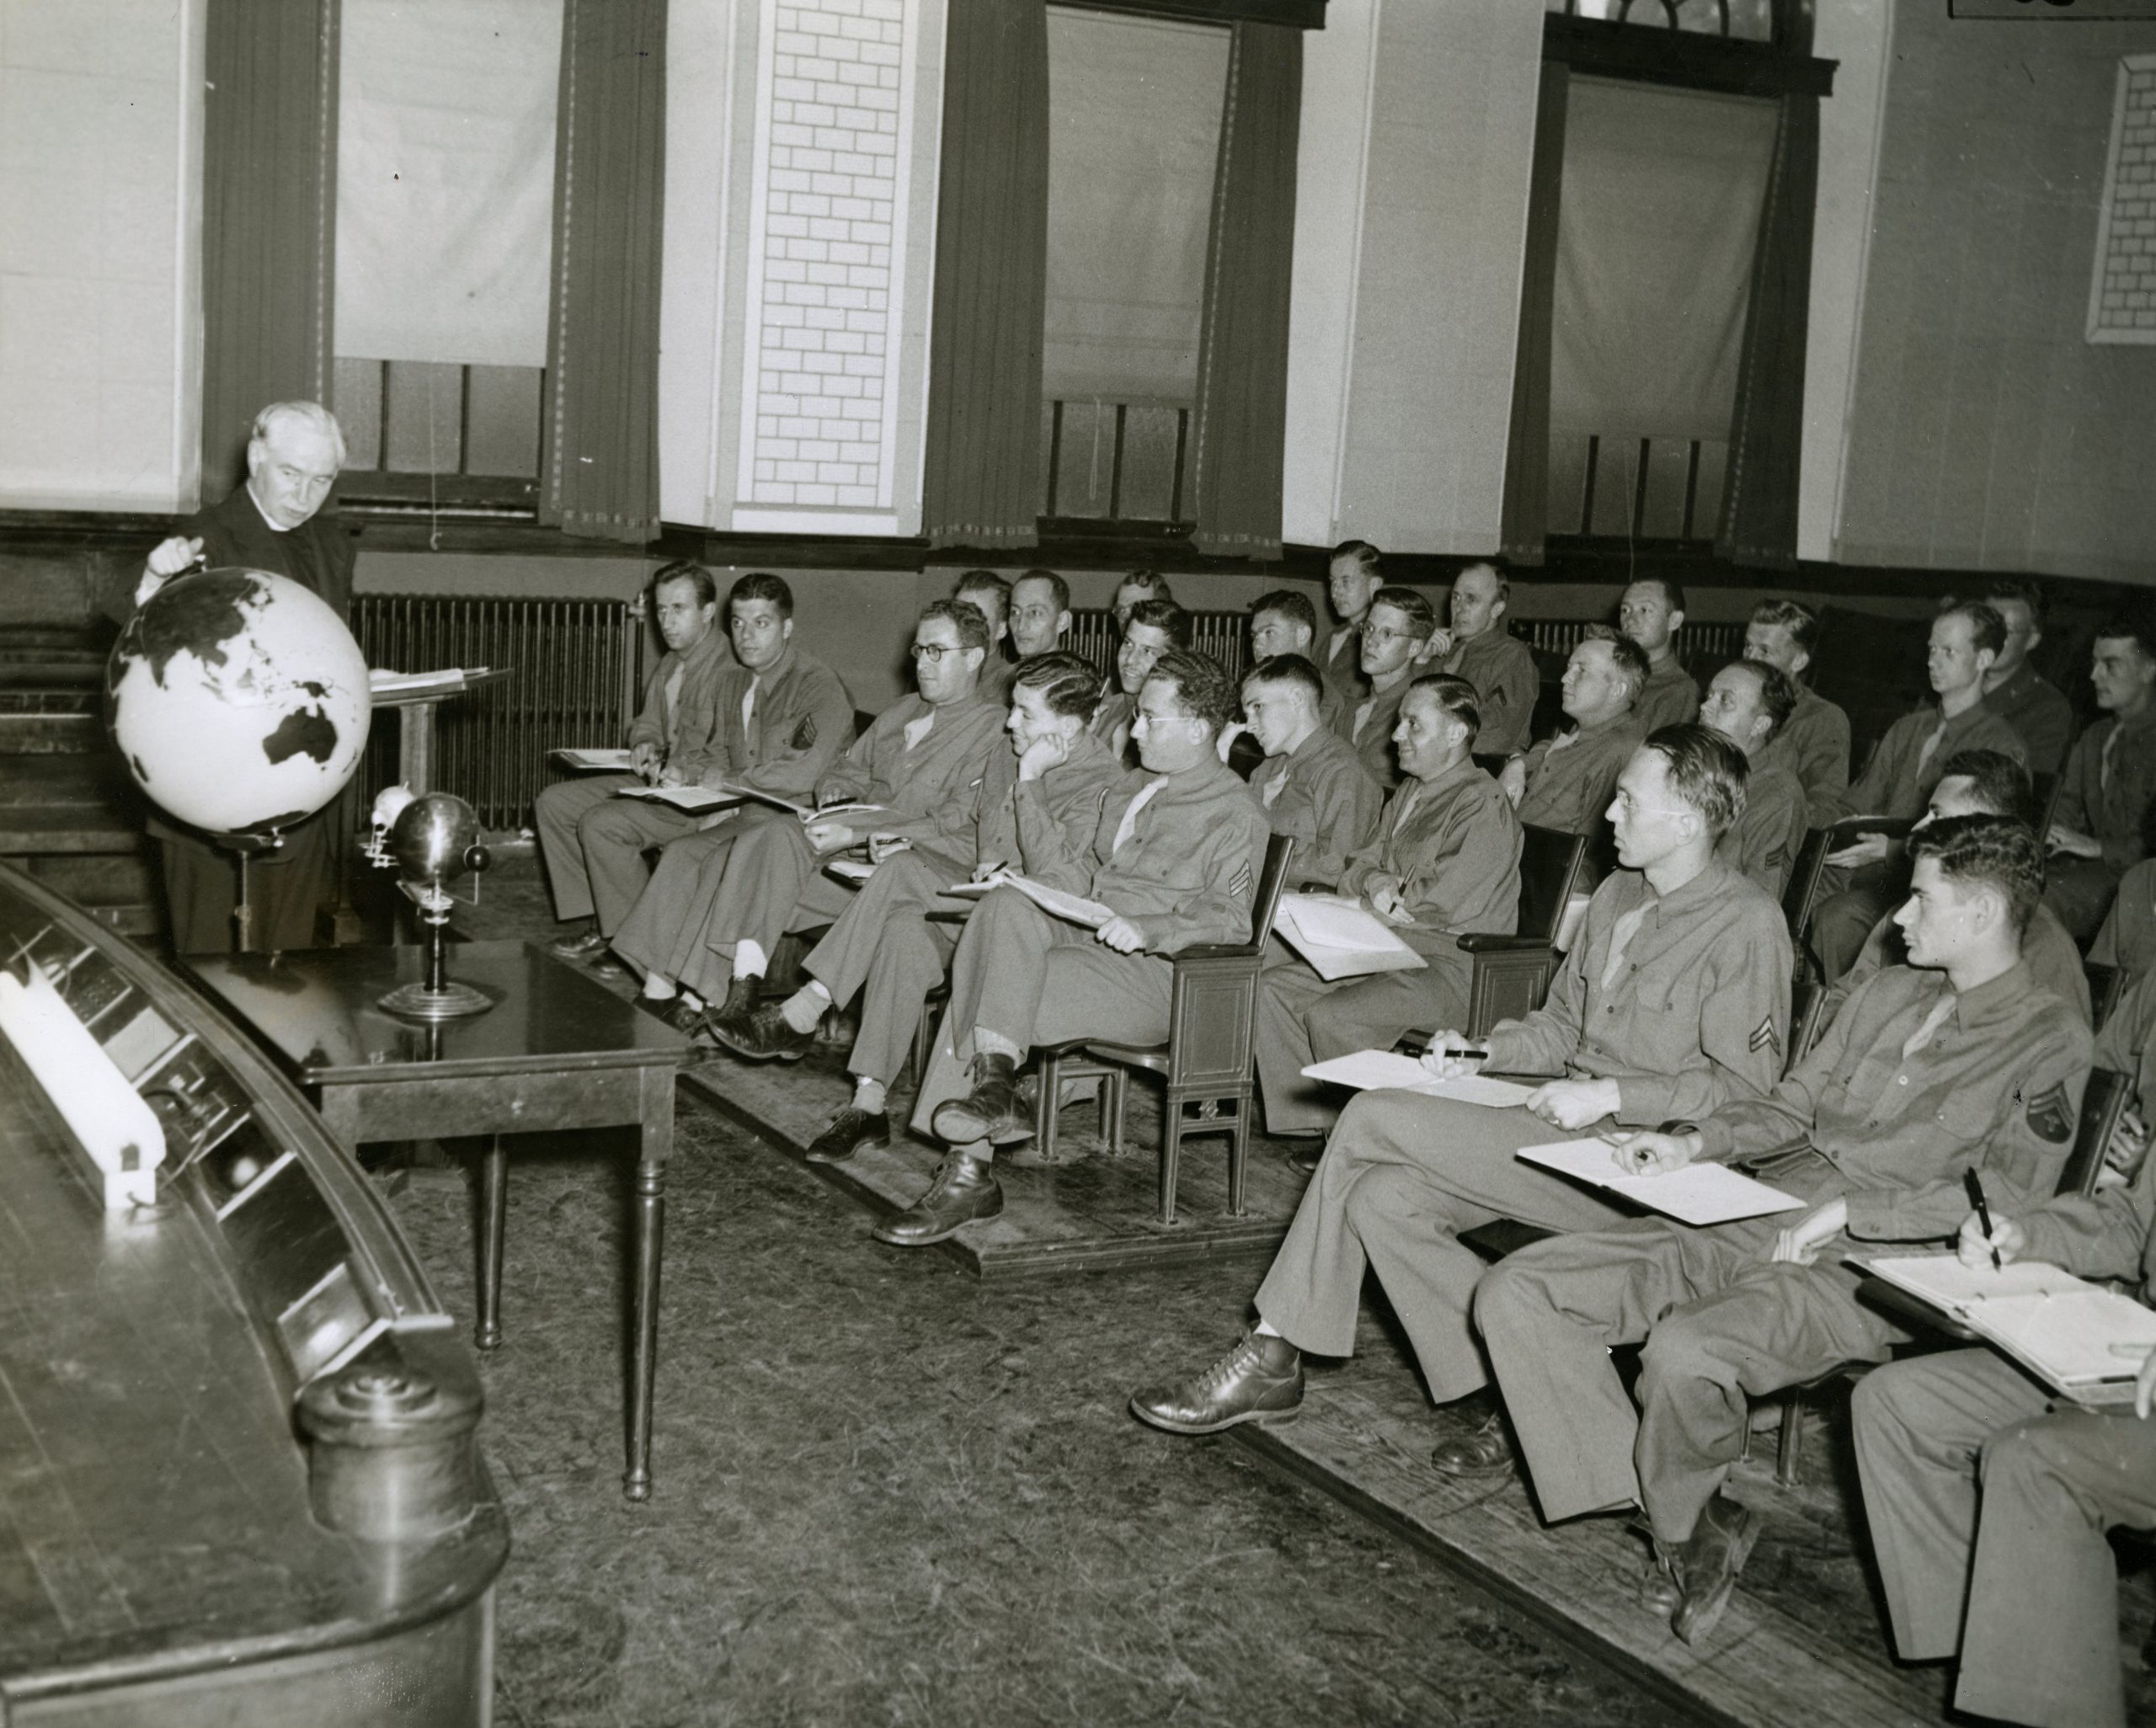 Students in WWII uniform listening to a lecture by Father Walsh in Healy Hall